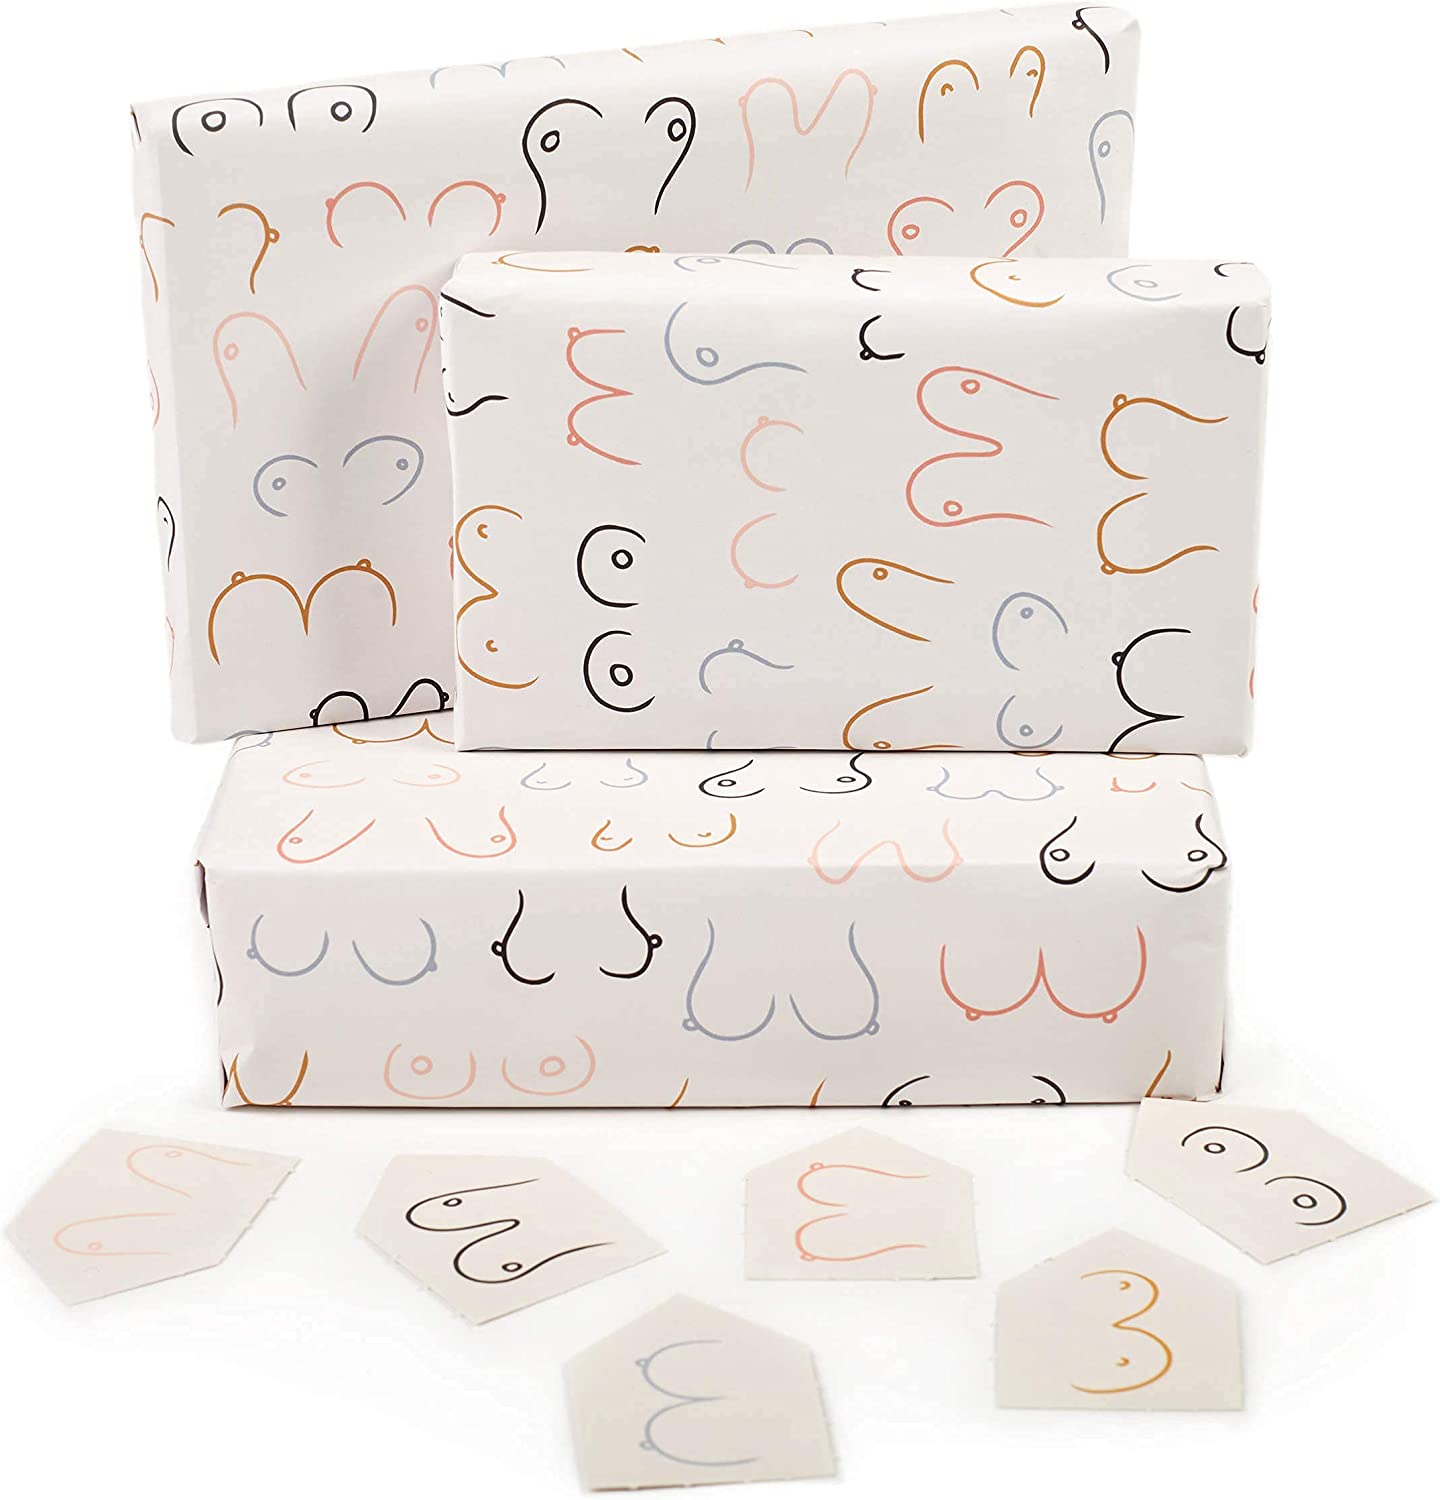 Central 23 Bridal Shower Wrapping Paper - Birthday 6 Count (Pack of 1), Doodle Boobs